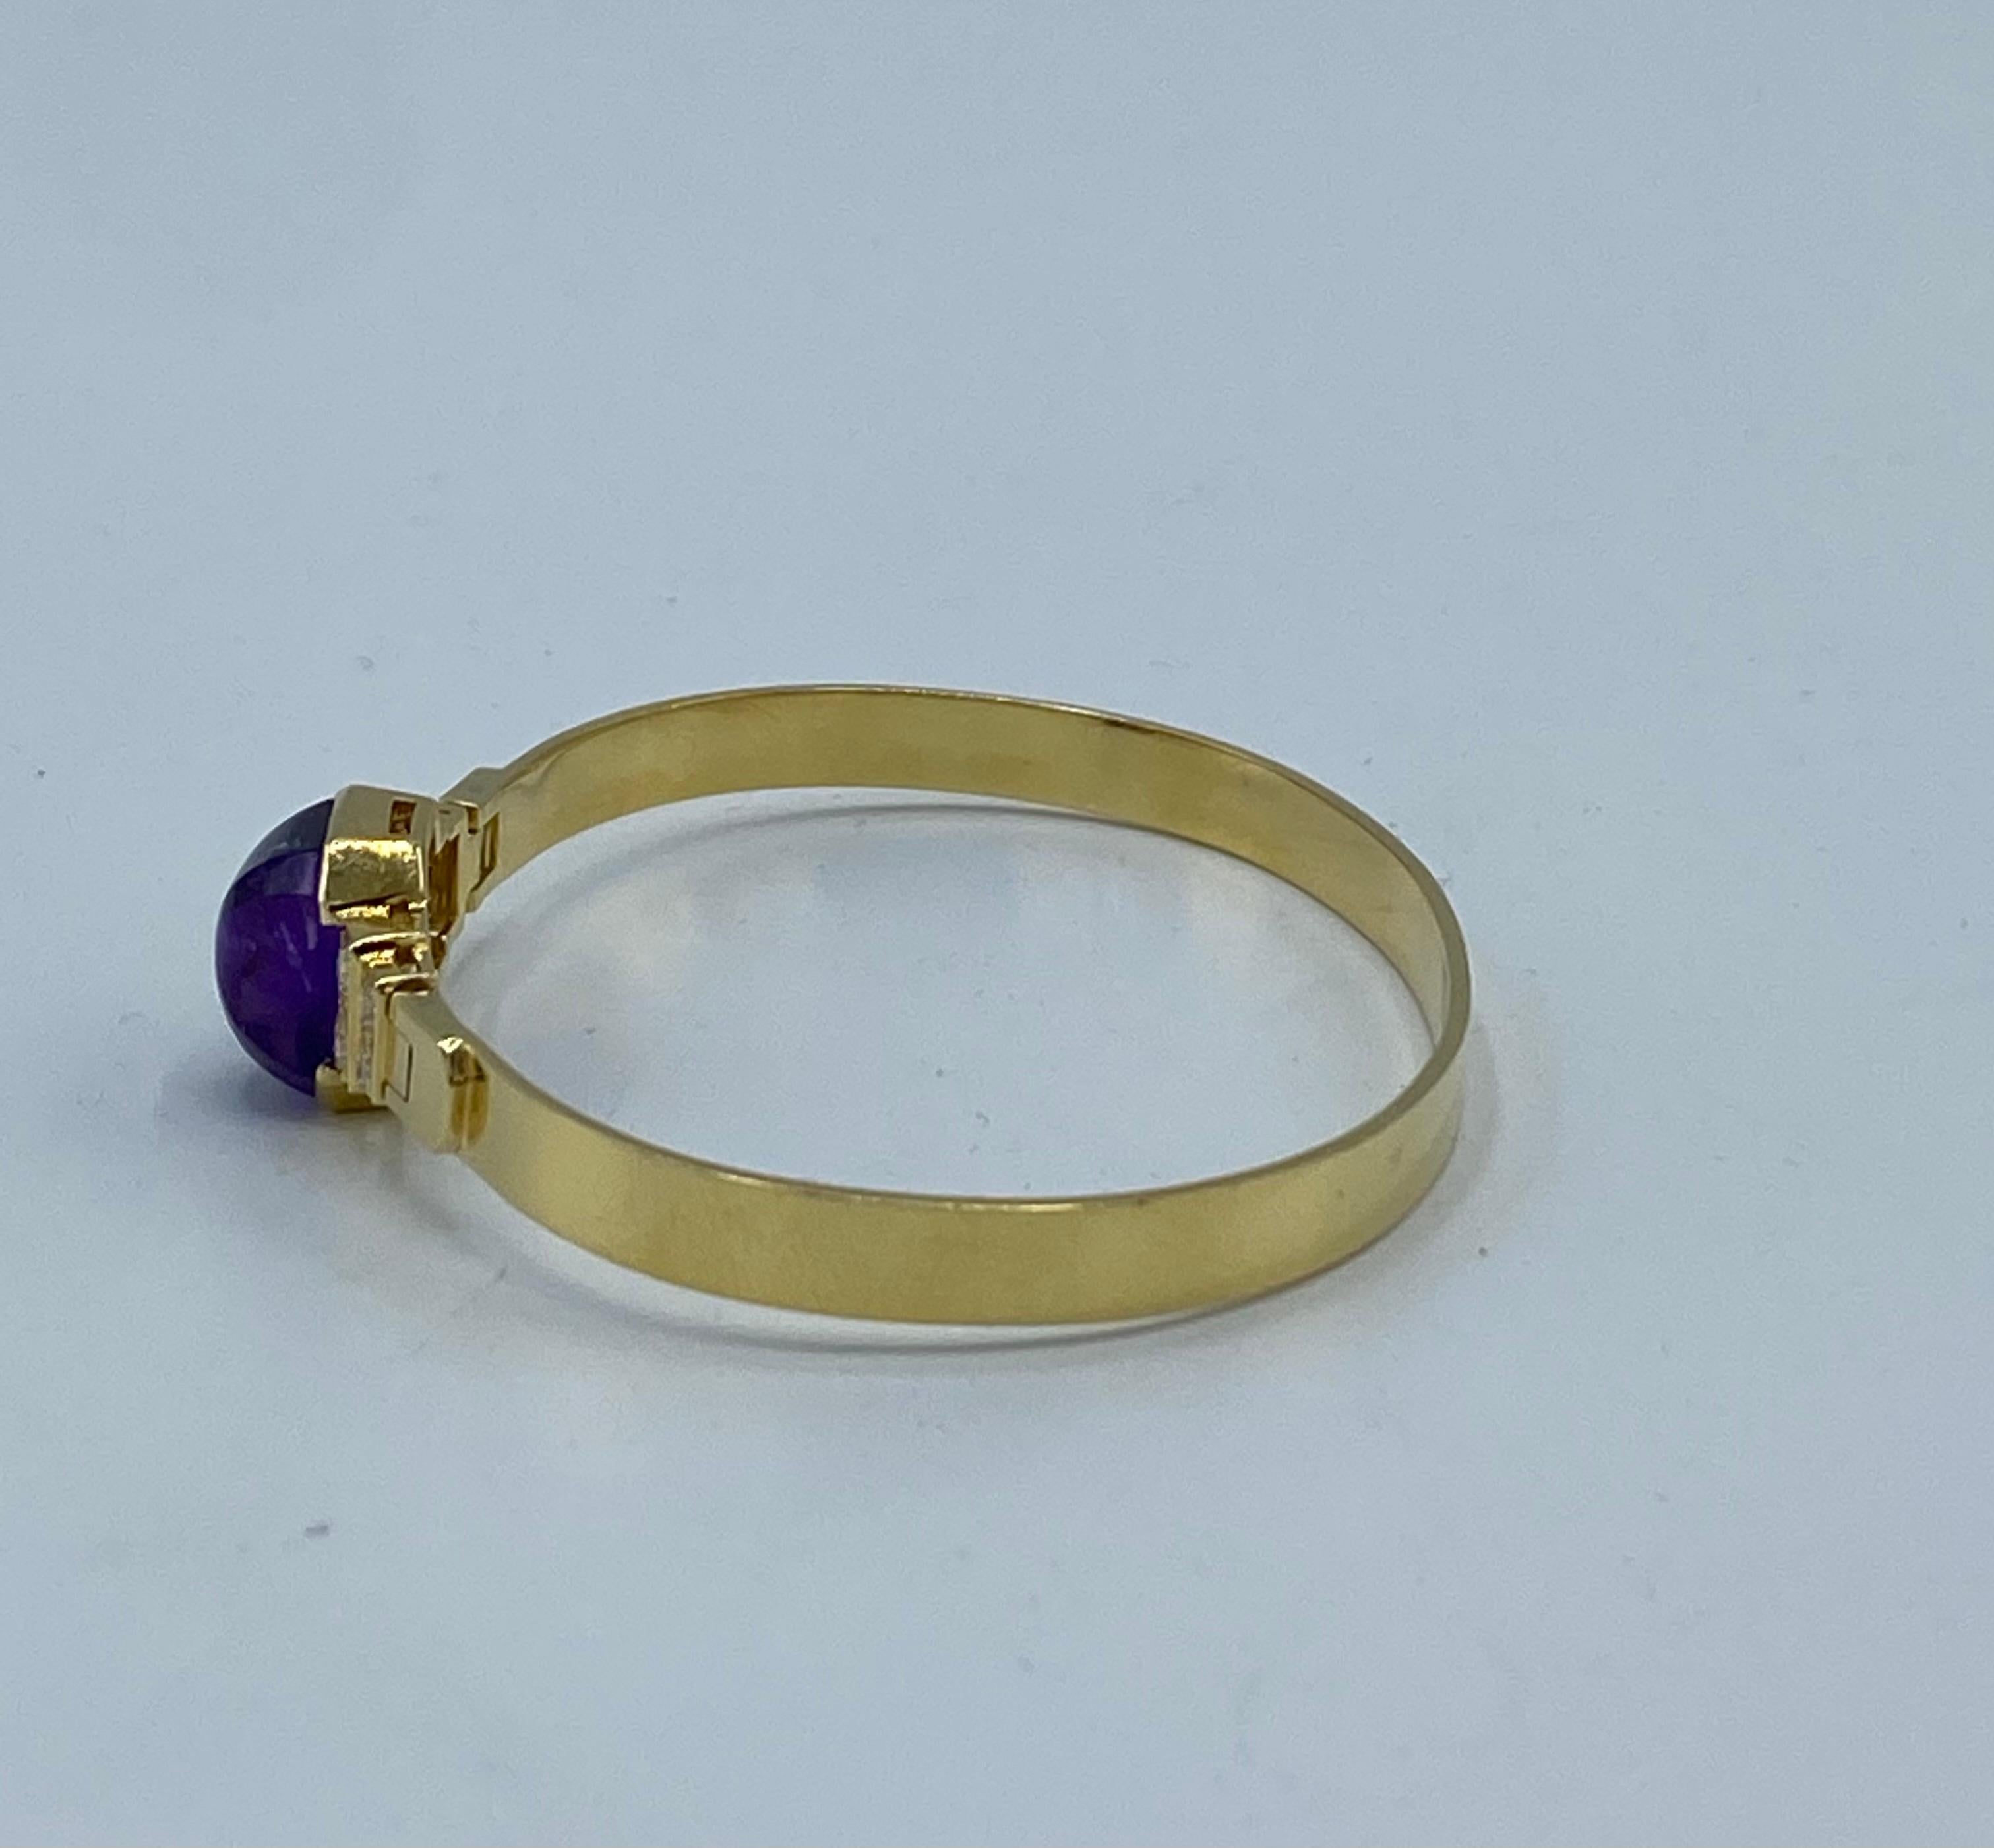 Product details:

The bangle features 18 karat yellow gold with 0.58 cts of sugarloaf amethyst and 0.60 cts of round brilliant cut diamonds, F/ VS1.
It is signed by Cartier, stamped with 18K and numbered 000275.
Total weight is 14.6 grams.
The inner